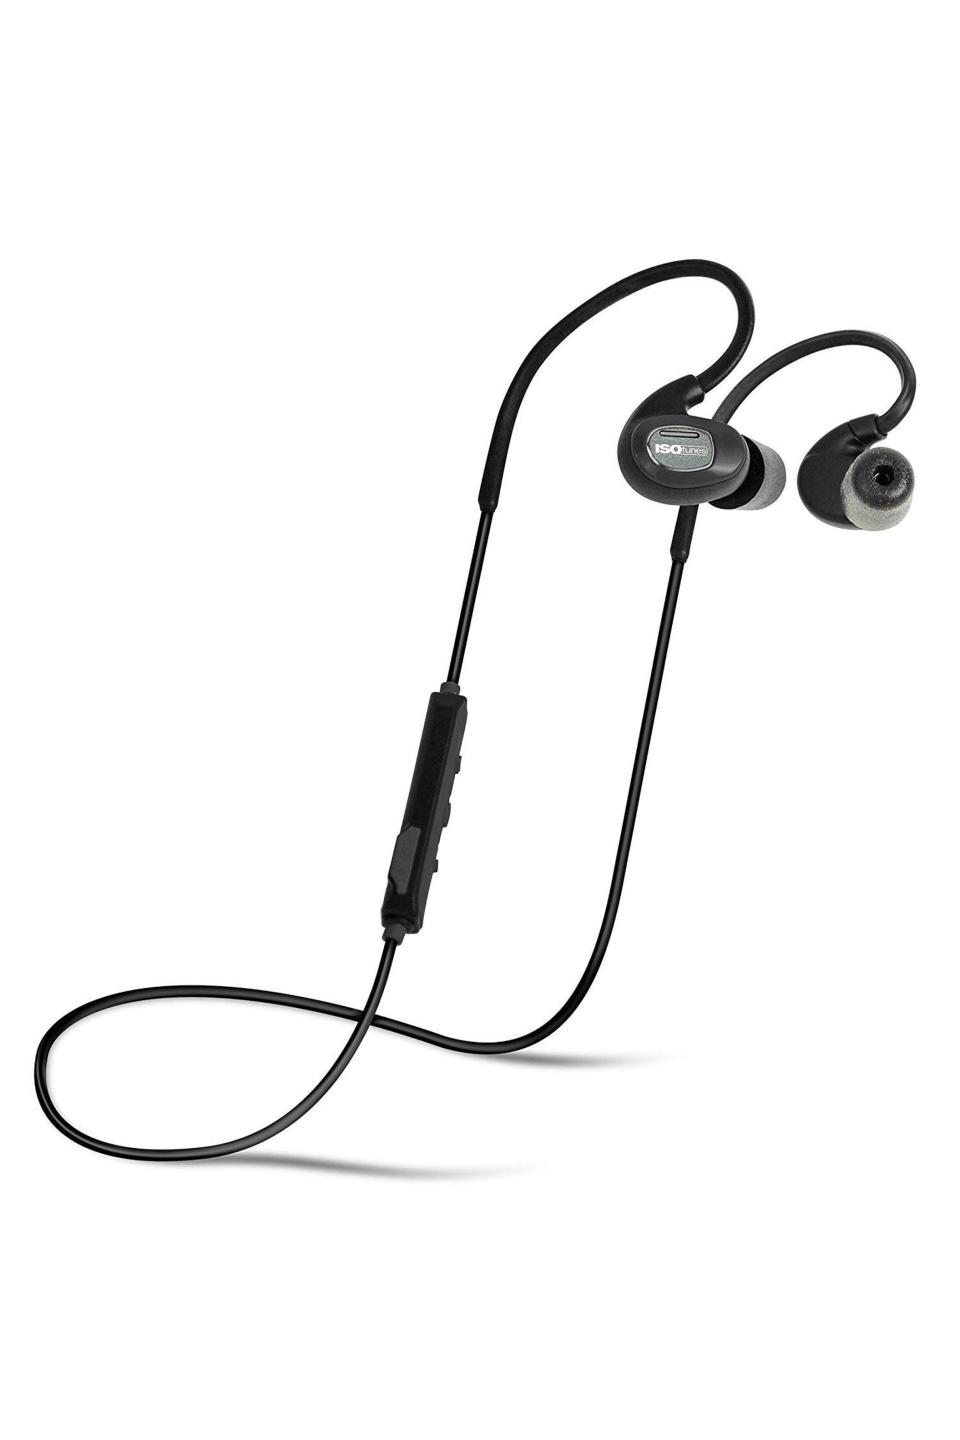 7) ISOtunes PRO Earbuds